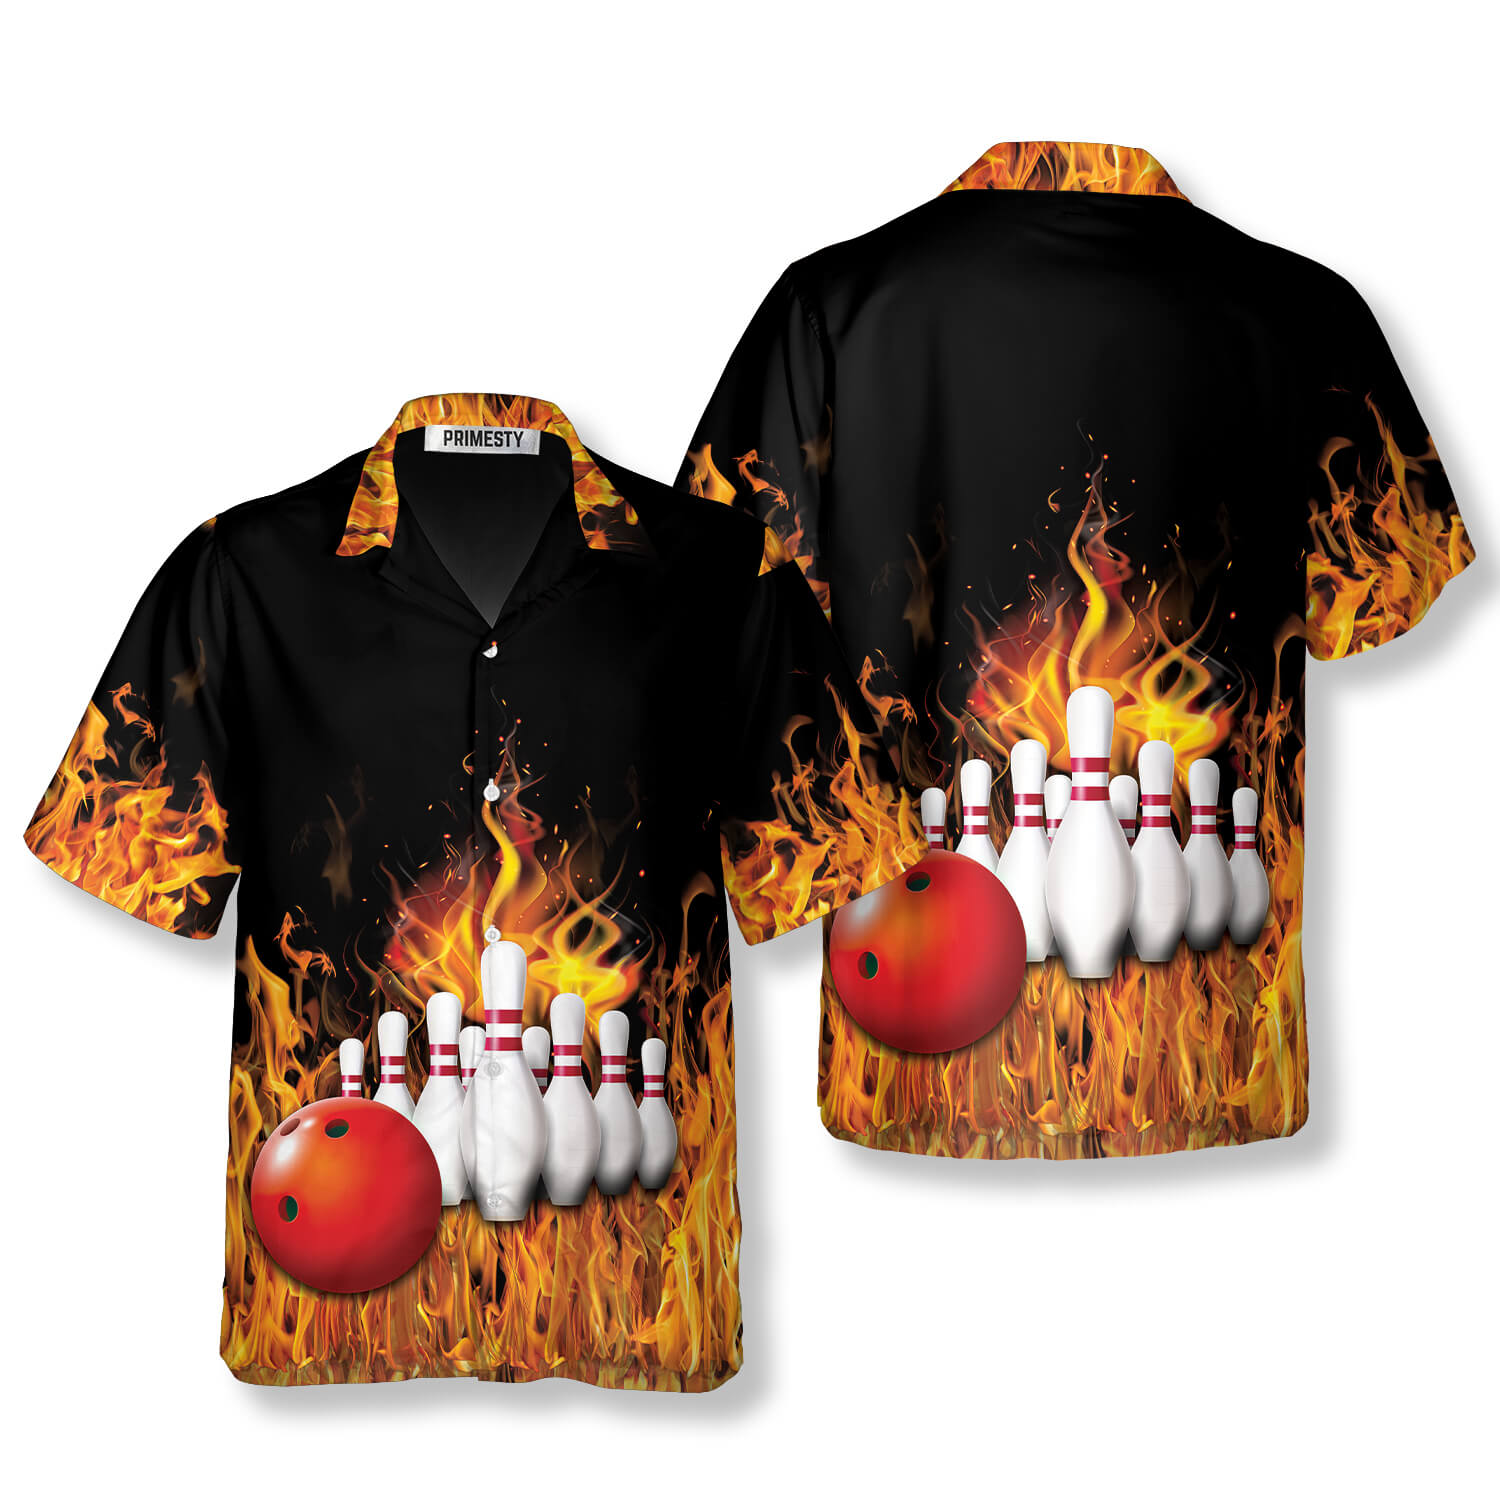 My Drinking Team Has Bowling Problem On Blue Fire Trendy Hawaiian Shirt,  Bowling Trendy Hawaiian Shirt For Men, Women, Bowling Team Shirt - Trendy  Aloha